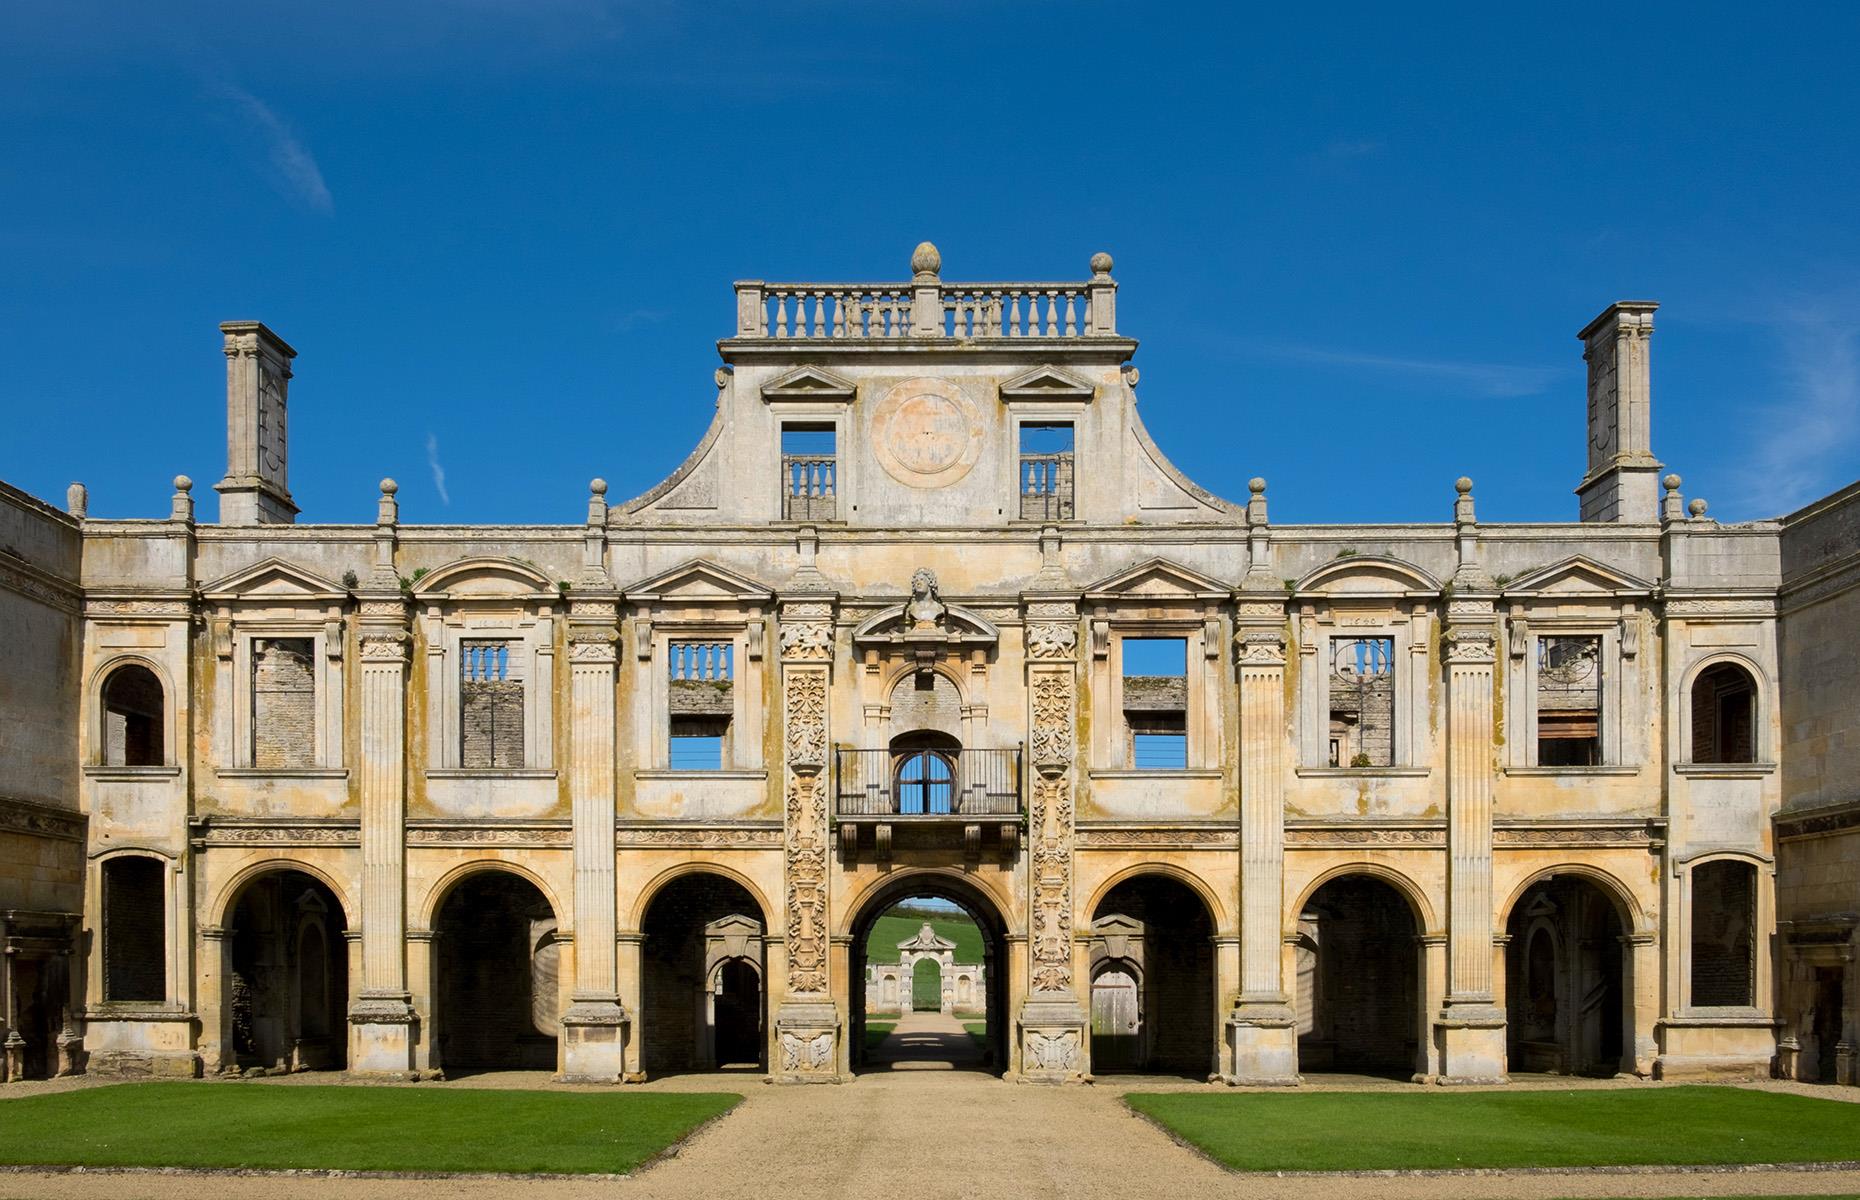 <p>Once considered among England's greatest 16th-century buildings, Kirby Hall was most notably owned by Sir Christopher Hatton, Lord Chancellor to Queen Elizabeth I, in the 1580s.</p>  <p>The grand façade is built from white Barnack stone and its design was taken from a book of French architectural patterns – a bit like the Elizabethan version of a flat-pack home! However, this <a href="https://www.loveproperty.com/gallerylist/73203/stunning-stately-homes-struggling-to-survive">stunning stately home is struggling to survive</a>. </p>